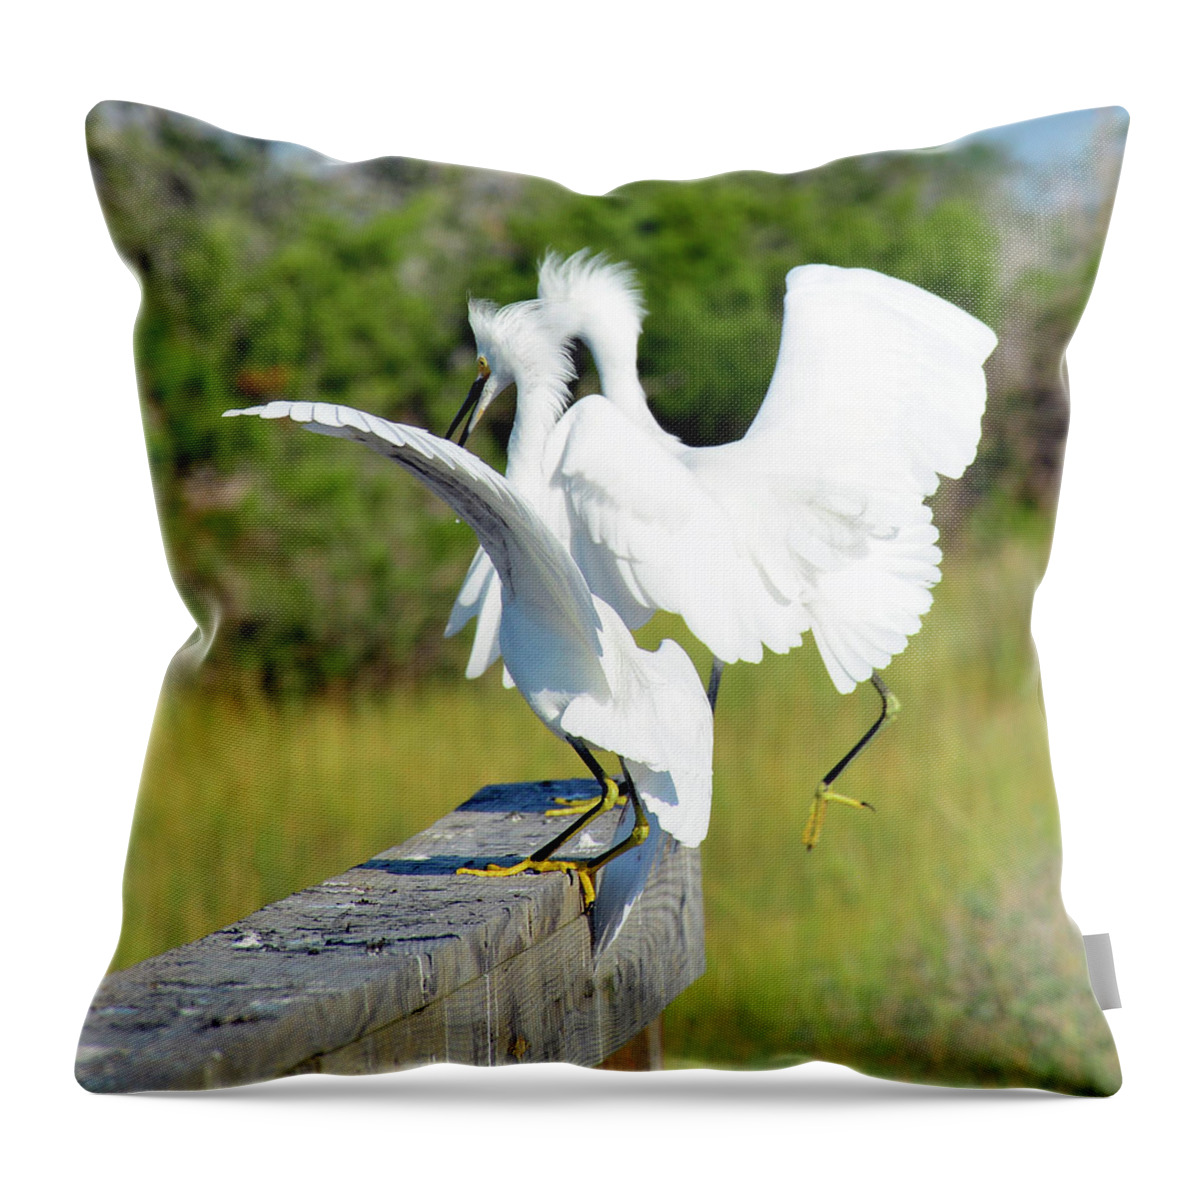 Birds Throw Pillow featuring the photograph Dancing Snowy Egrets by Bruce Gourley